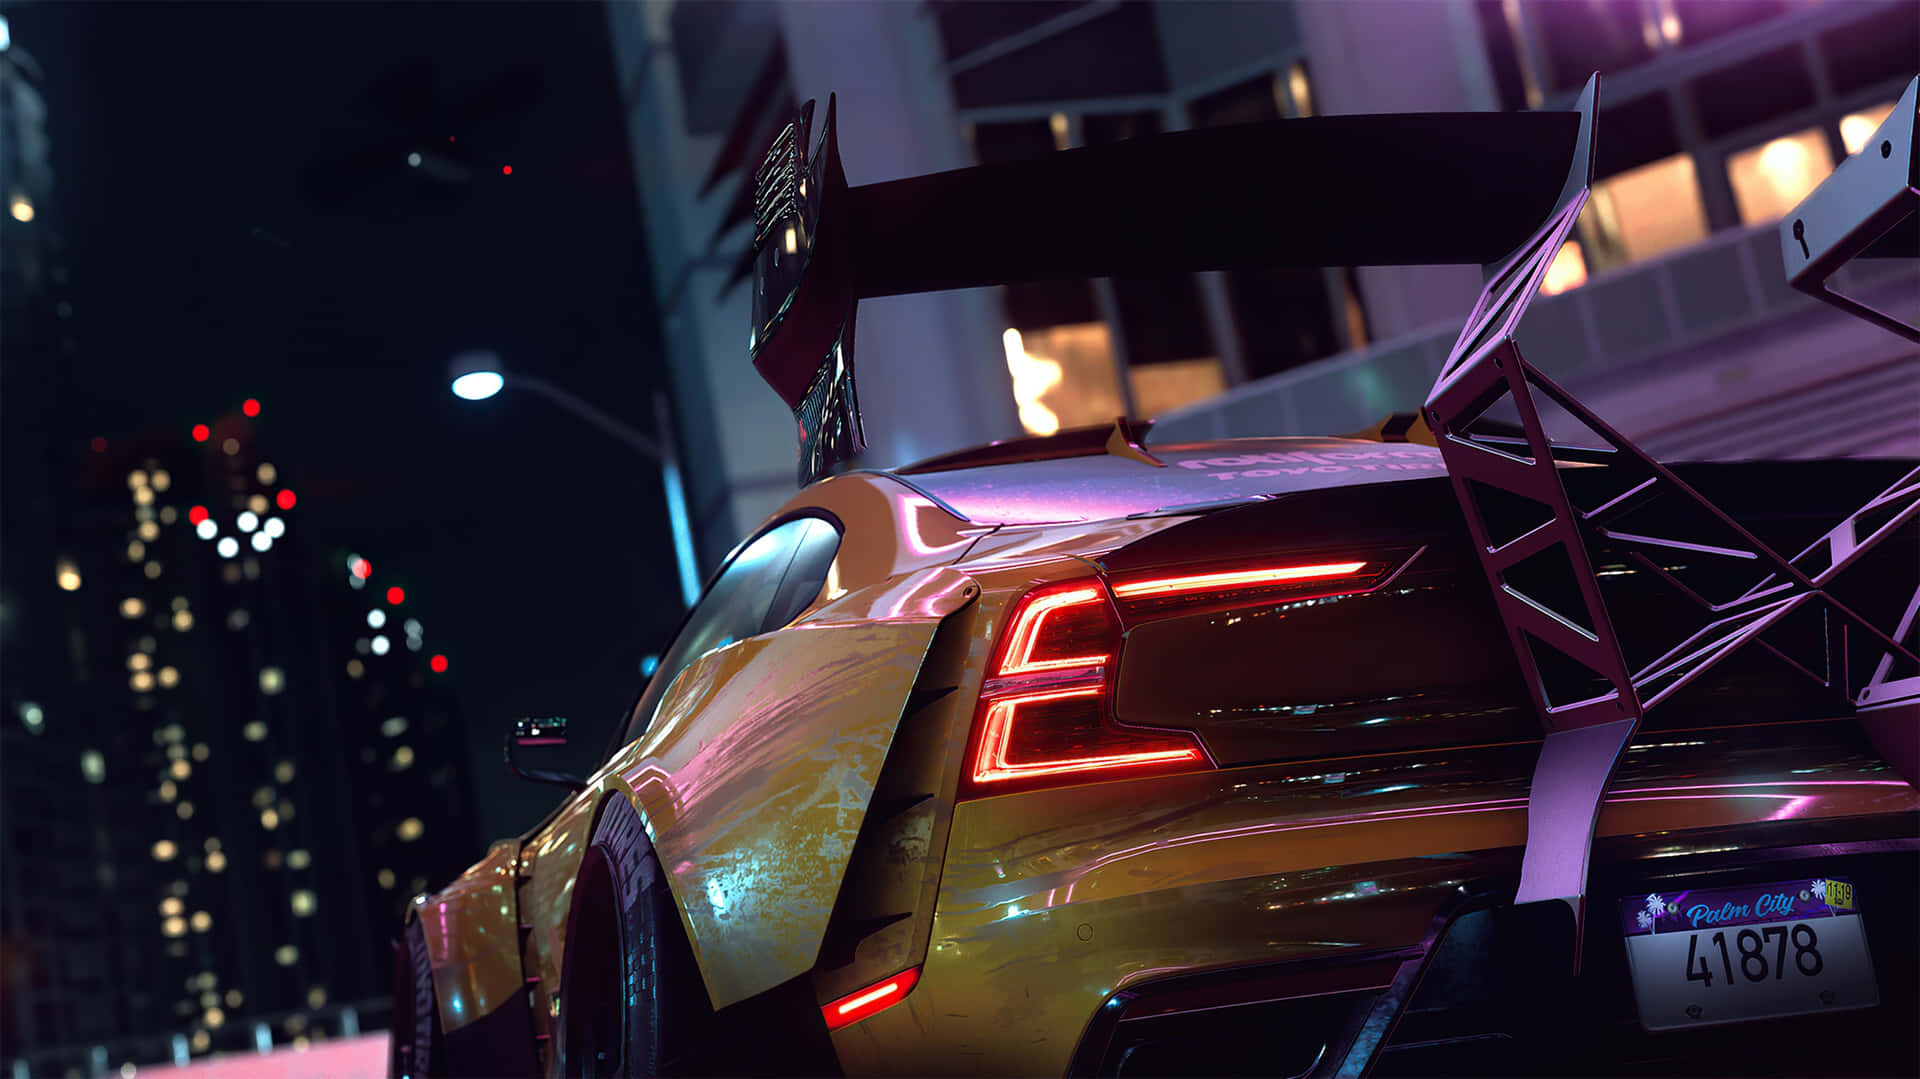 Get behind the wheel and race around with the latest Need for Speed (NFS) Game. Wallpaper